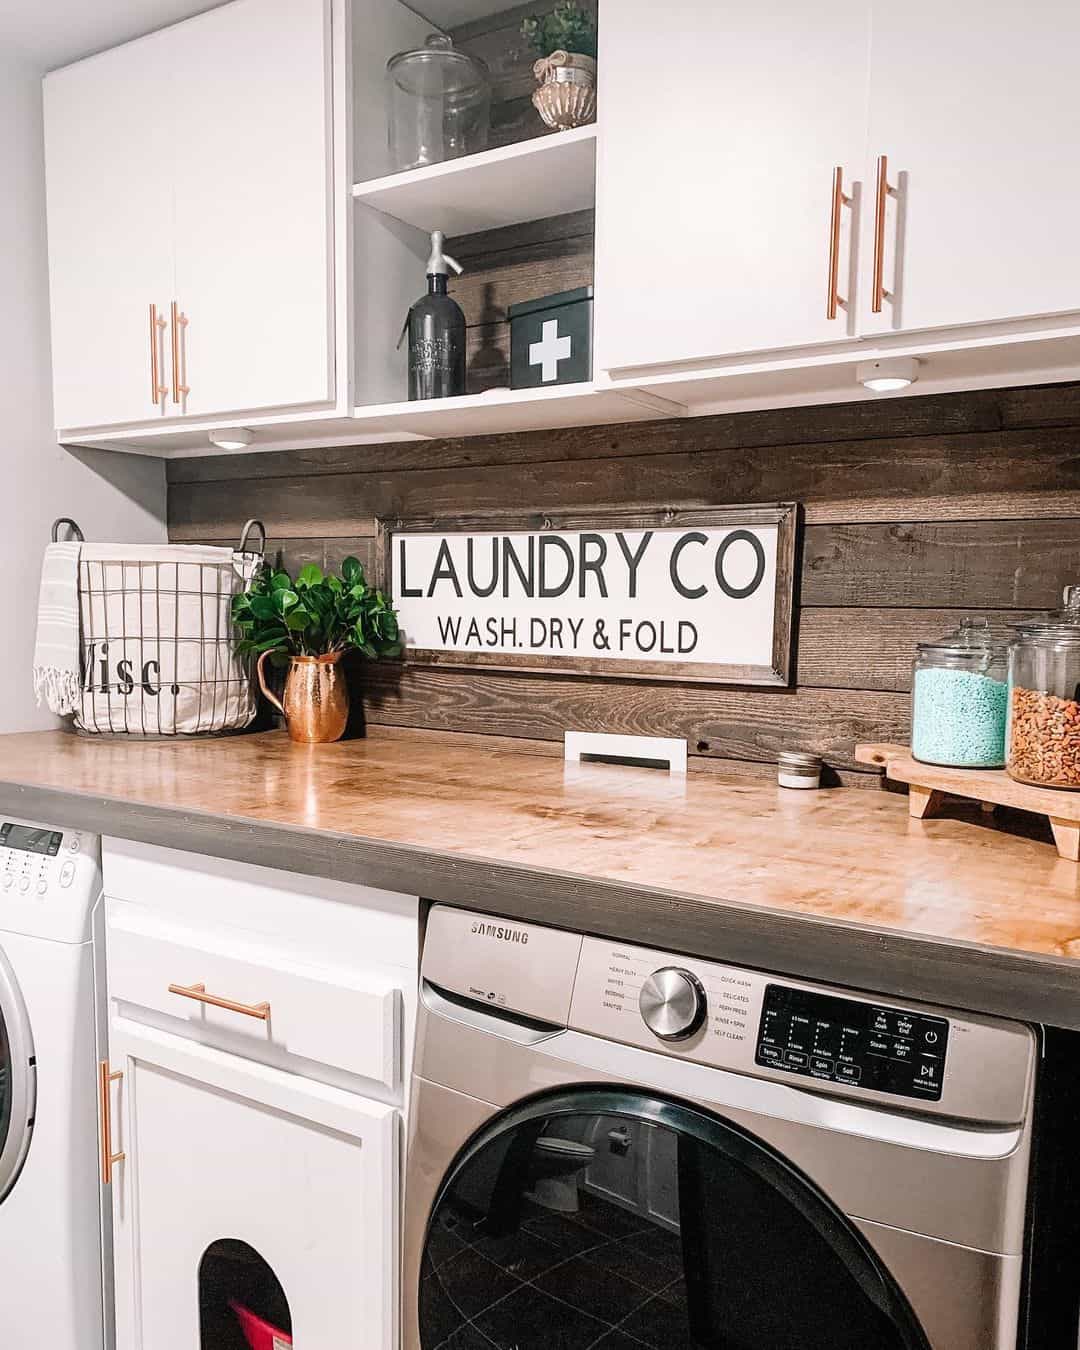 https://www.soulandlane.com/wp-content/uploads/2023/02/Built-in-Storage-Solutions-Between-a-Washer-and-Dryer.jpg